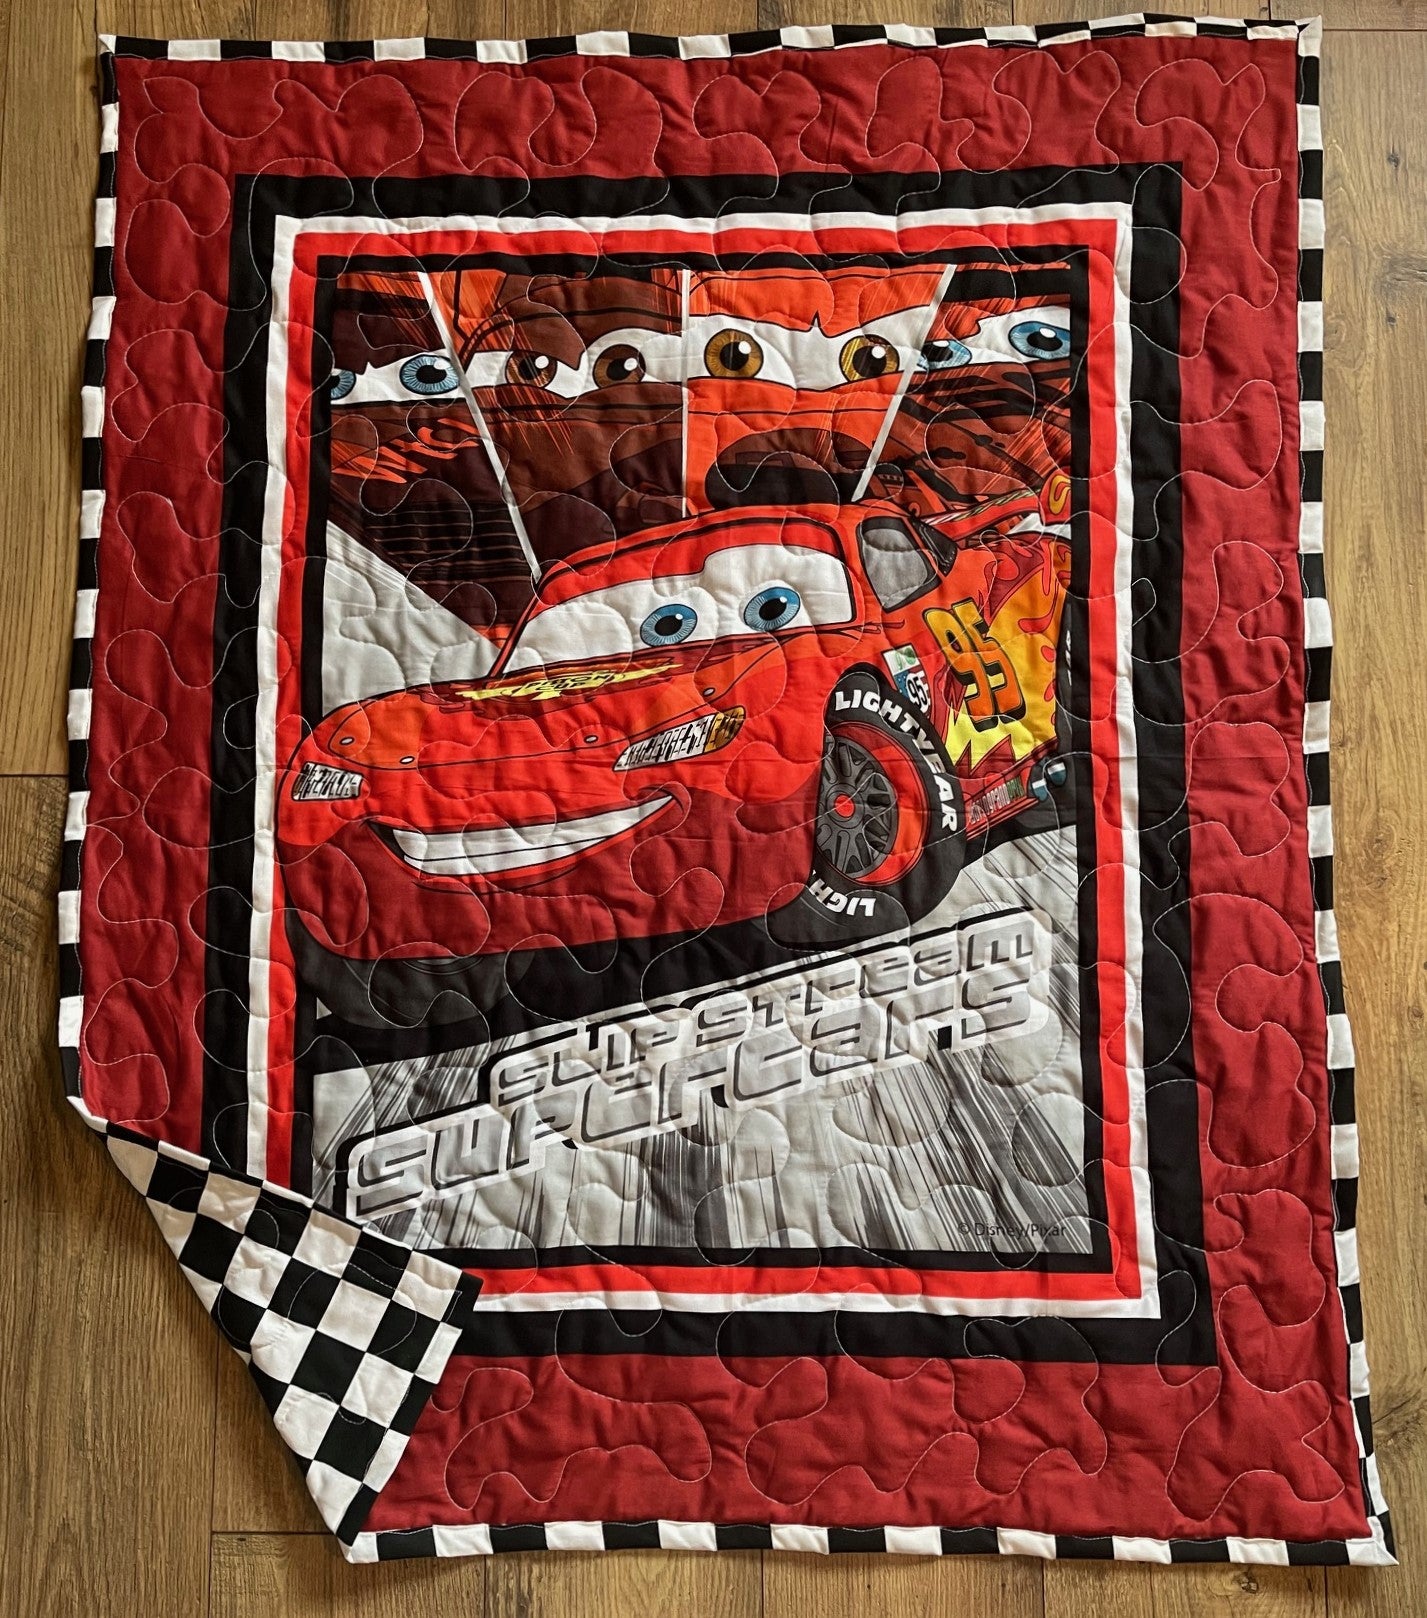 DISNEY CARS LGHTNING MC QUEEN 95 INSPIRED *SLIP STEAM SUPER CARS* 36"X44" QUILTED BLANKET